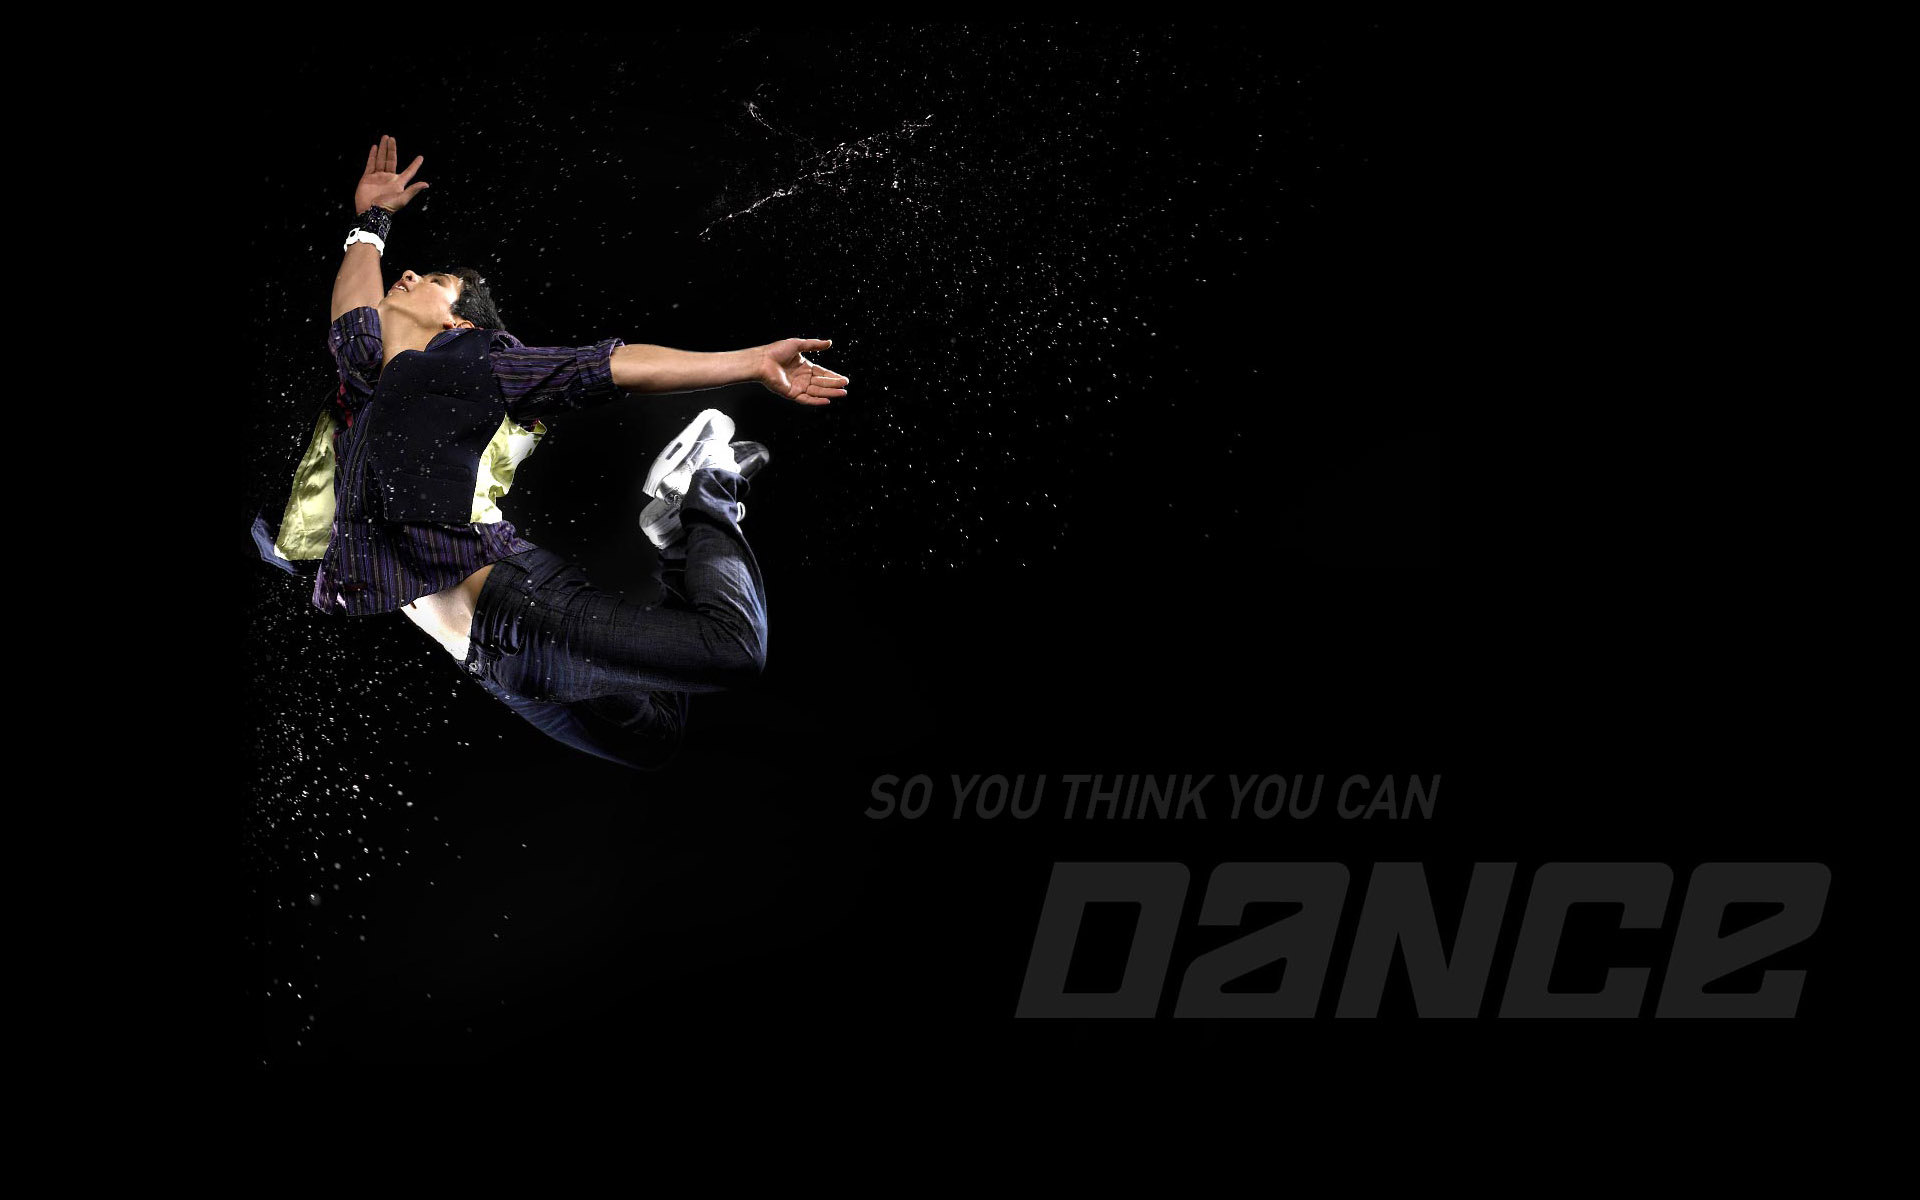 tv show, so you think you can dance, dance, dancer, dancing 1080p